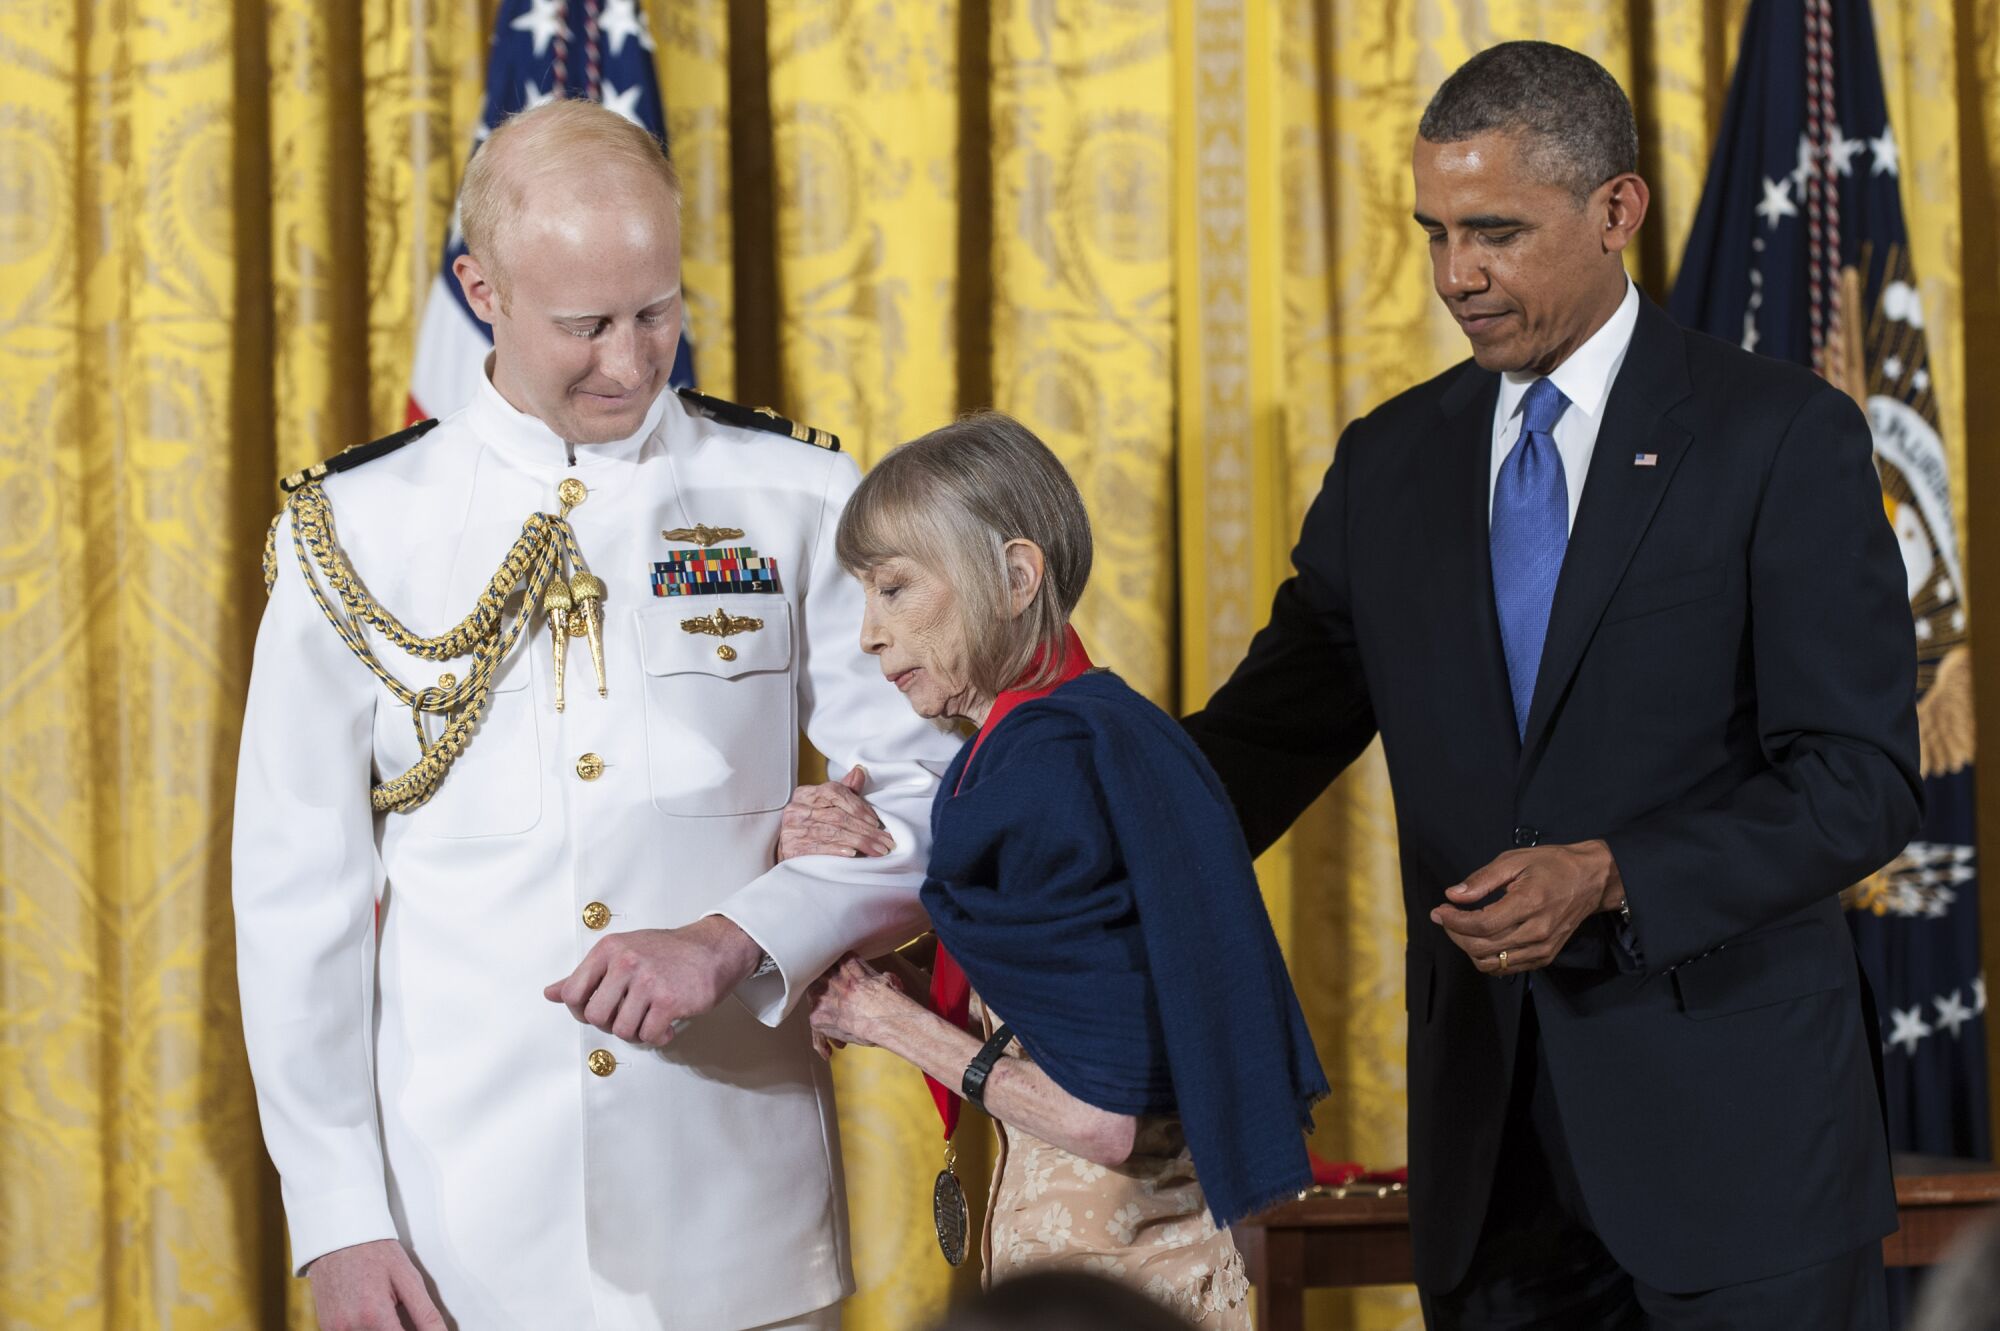 A uniformed official escorts Joan Didion as President Obama looks on.